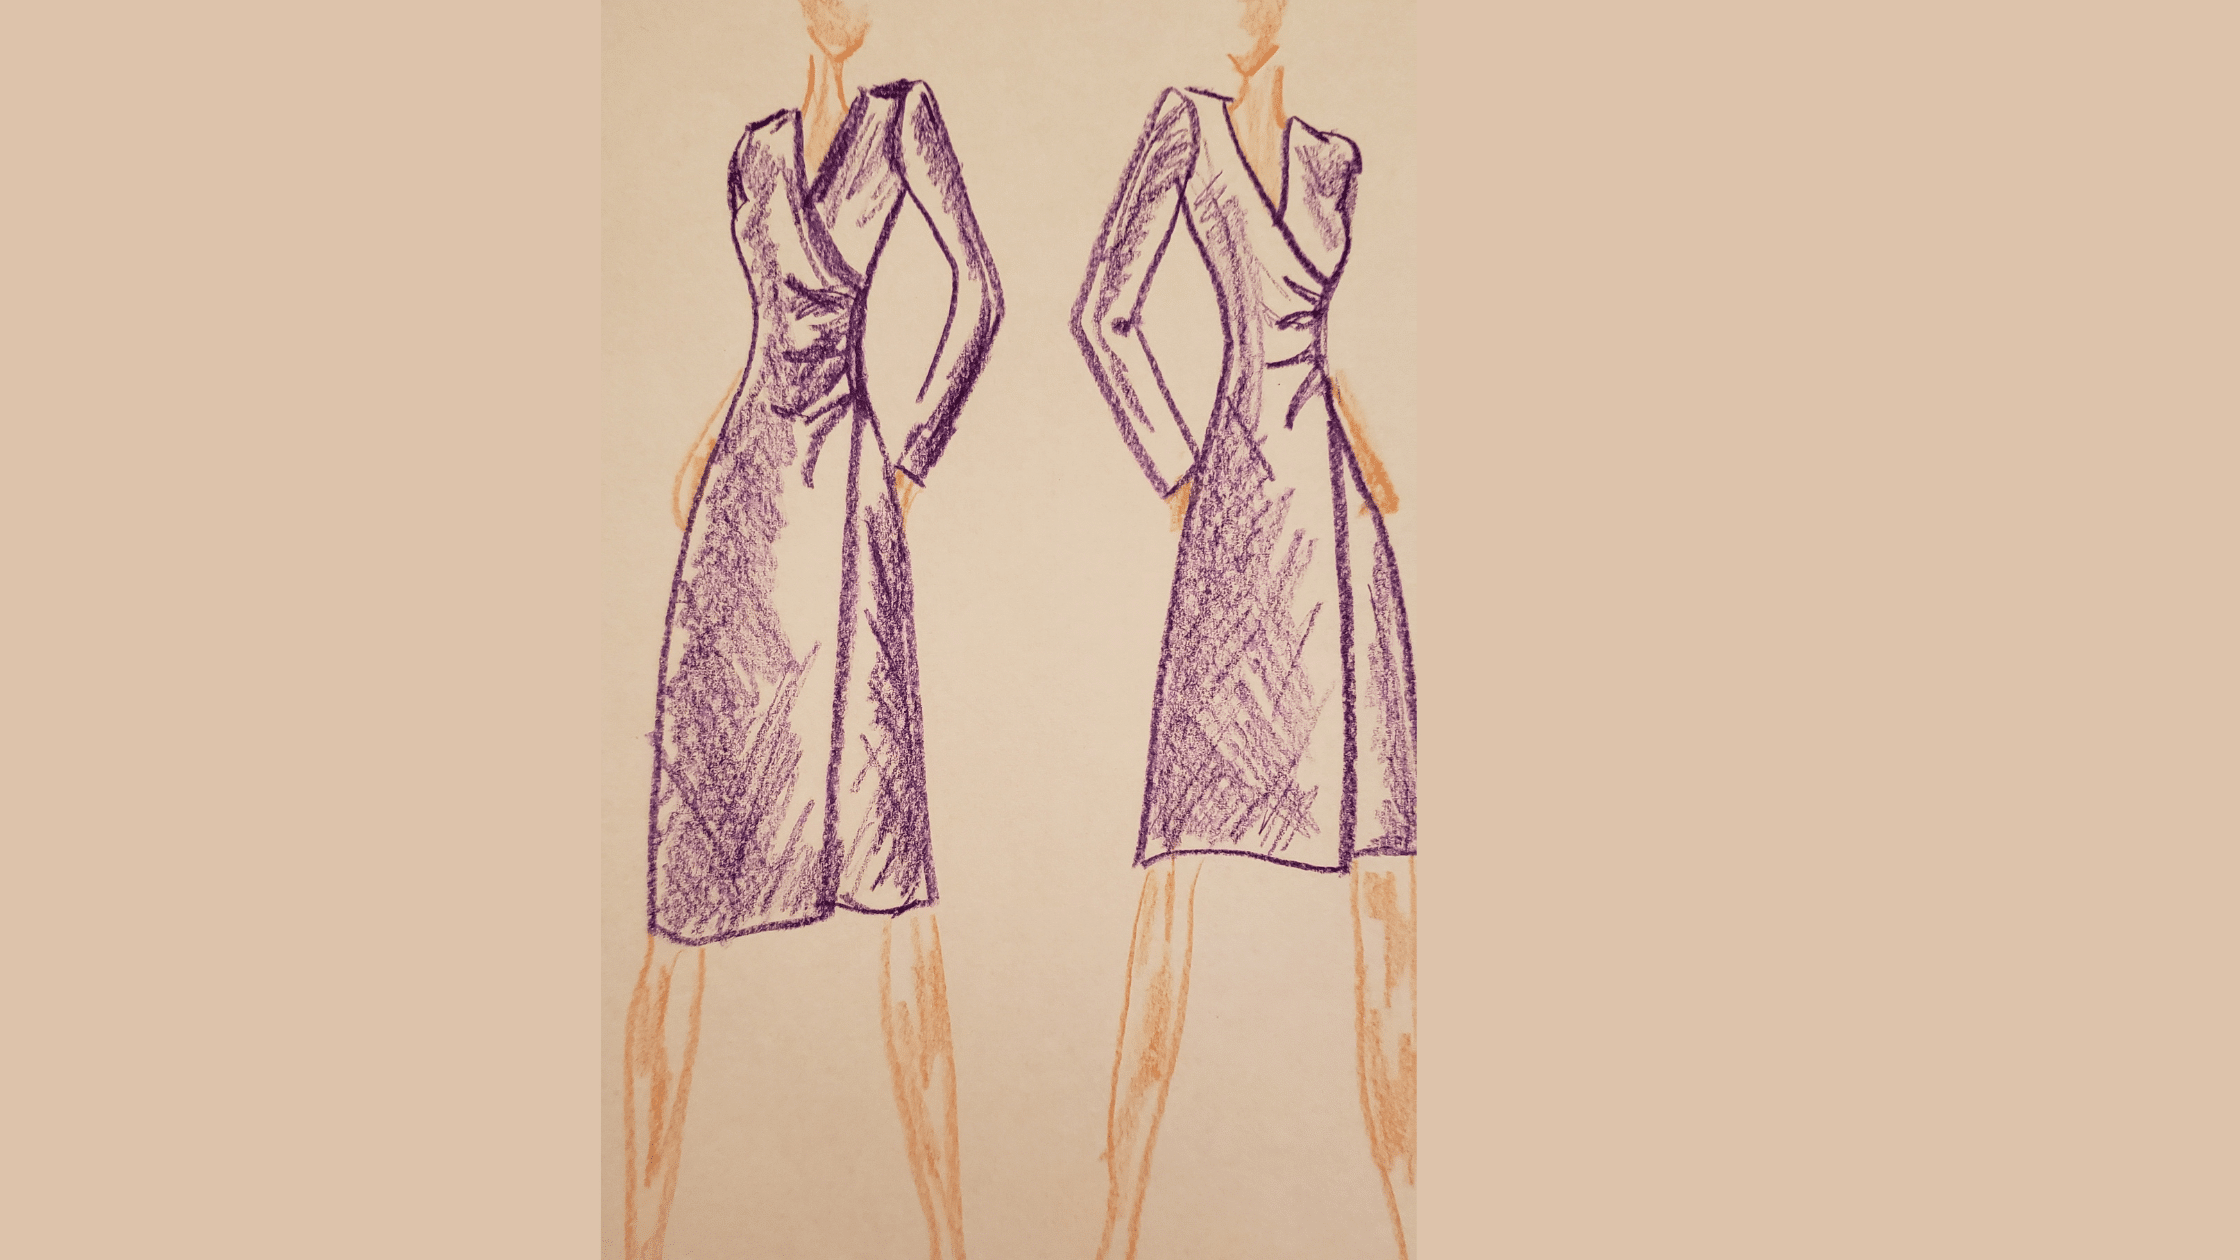 Kiki Borlenghi Fashion Sketches  Wrap gown in light weight wool fabric or  silk with dark trimmings Novelty belt chains  Facebook